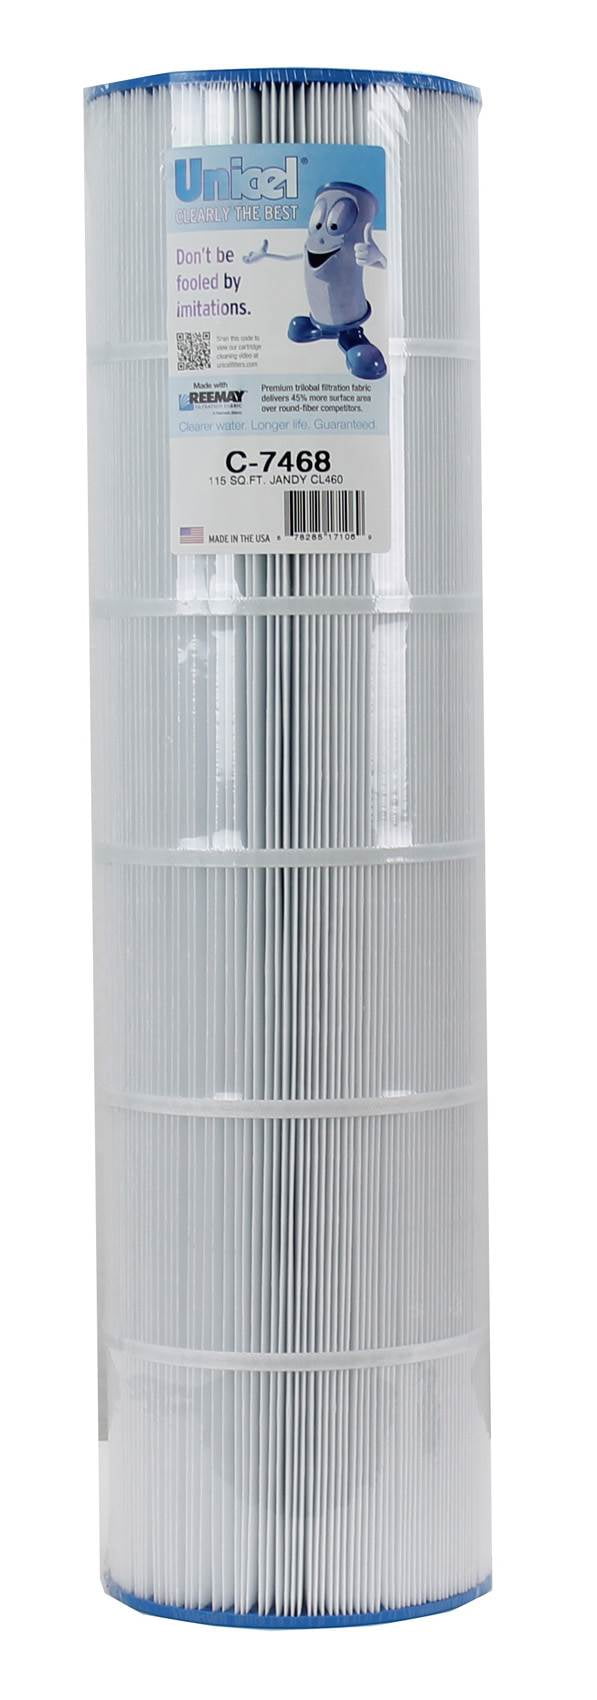 24445 Unicel 115 sq Jandy CL460 Replacement Filter Cartridge ft 